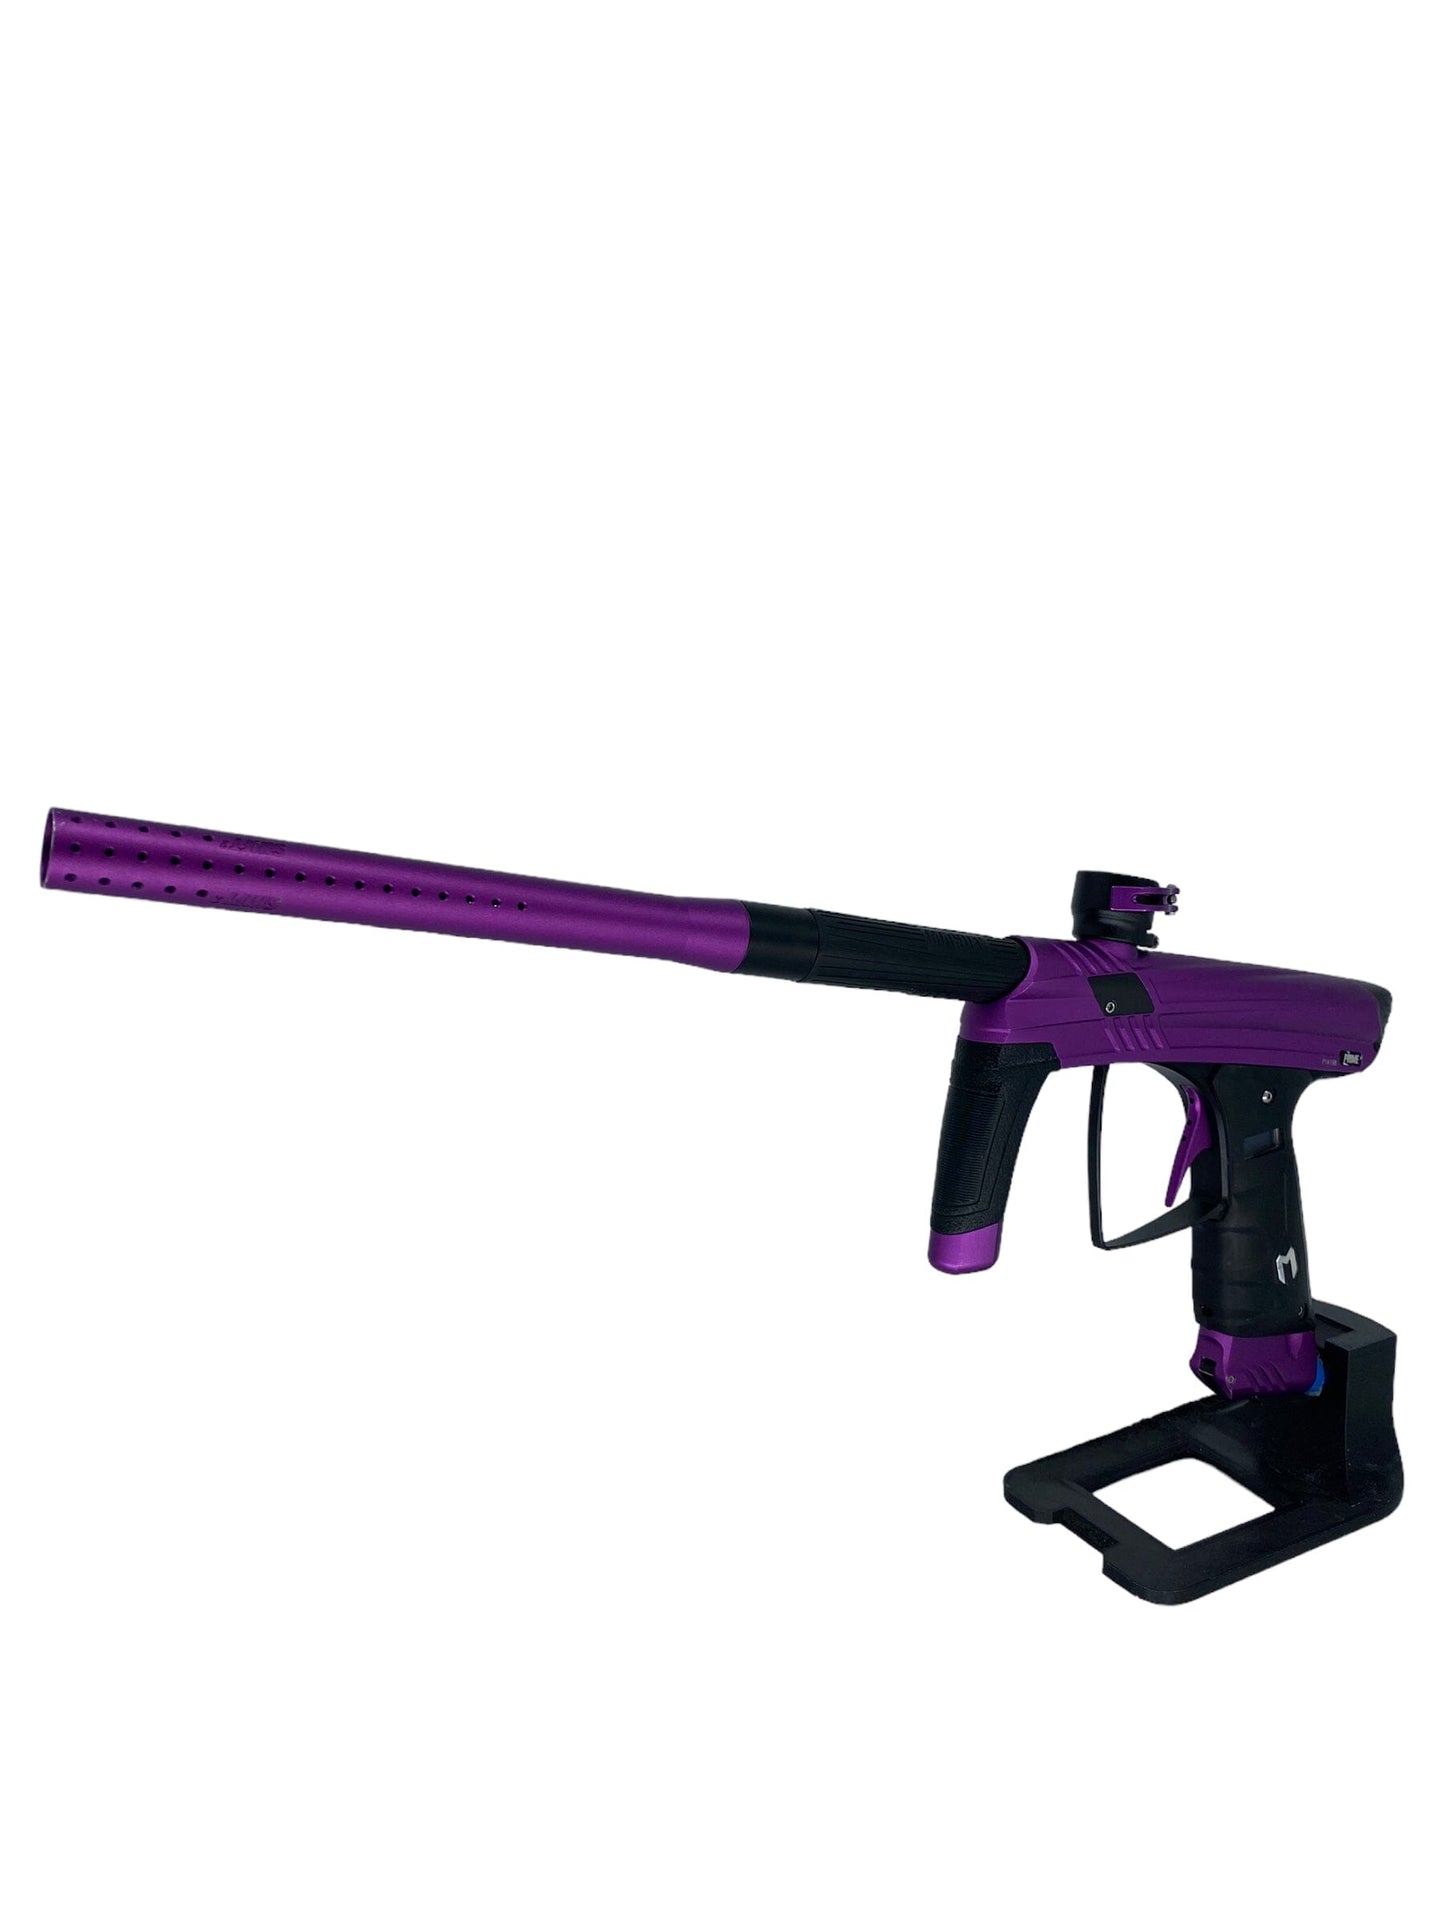 Used MacDev Prime Paintball Gun from CPXBrosPaintball Buy/Sell/Trade Paintball Markers, Paintball Hoppers, Paintball Masks, and Hormesis Headbands